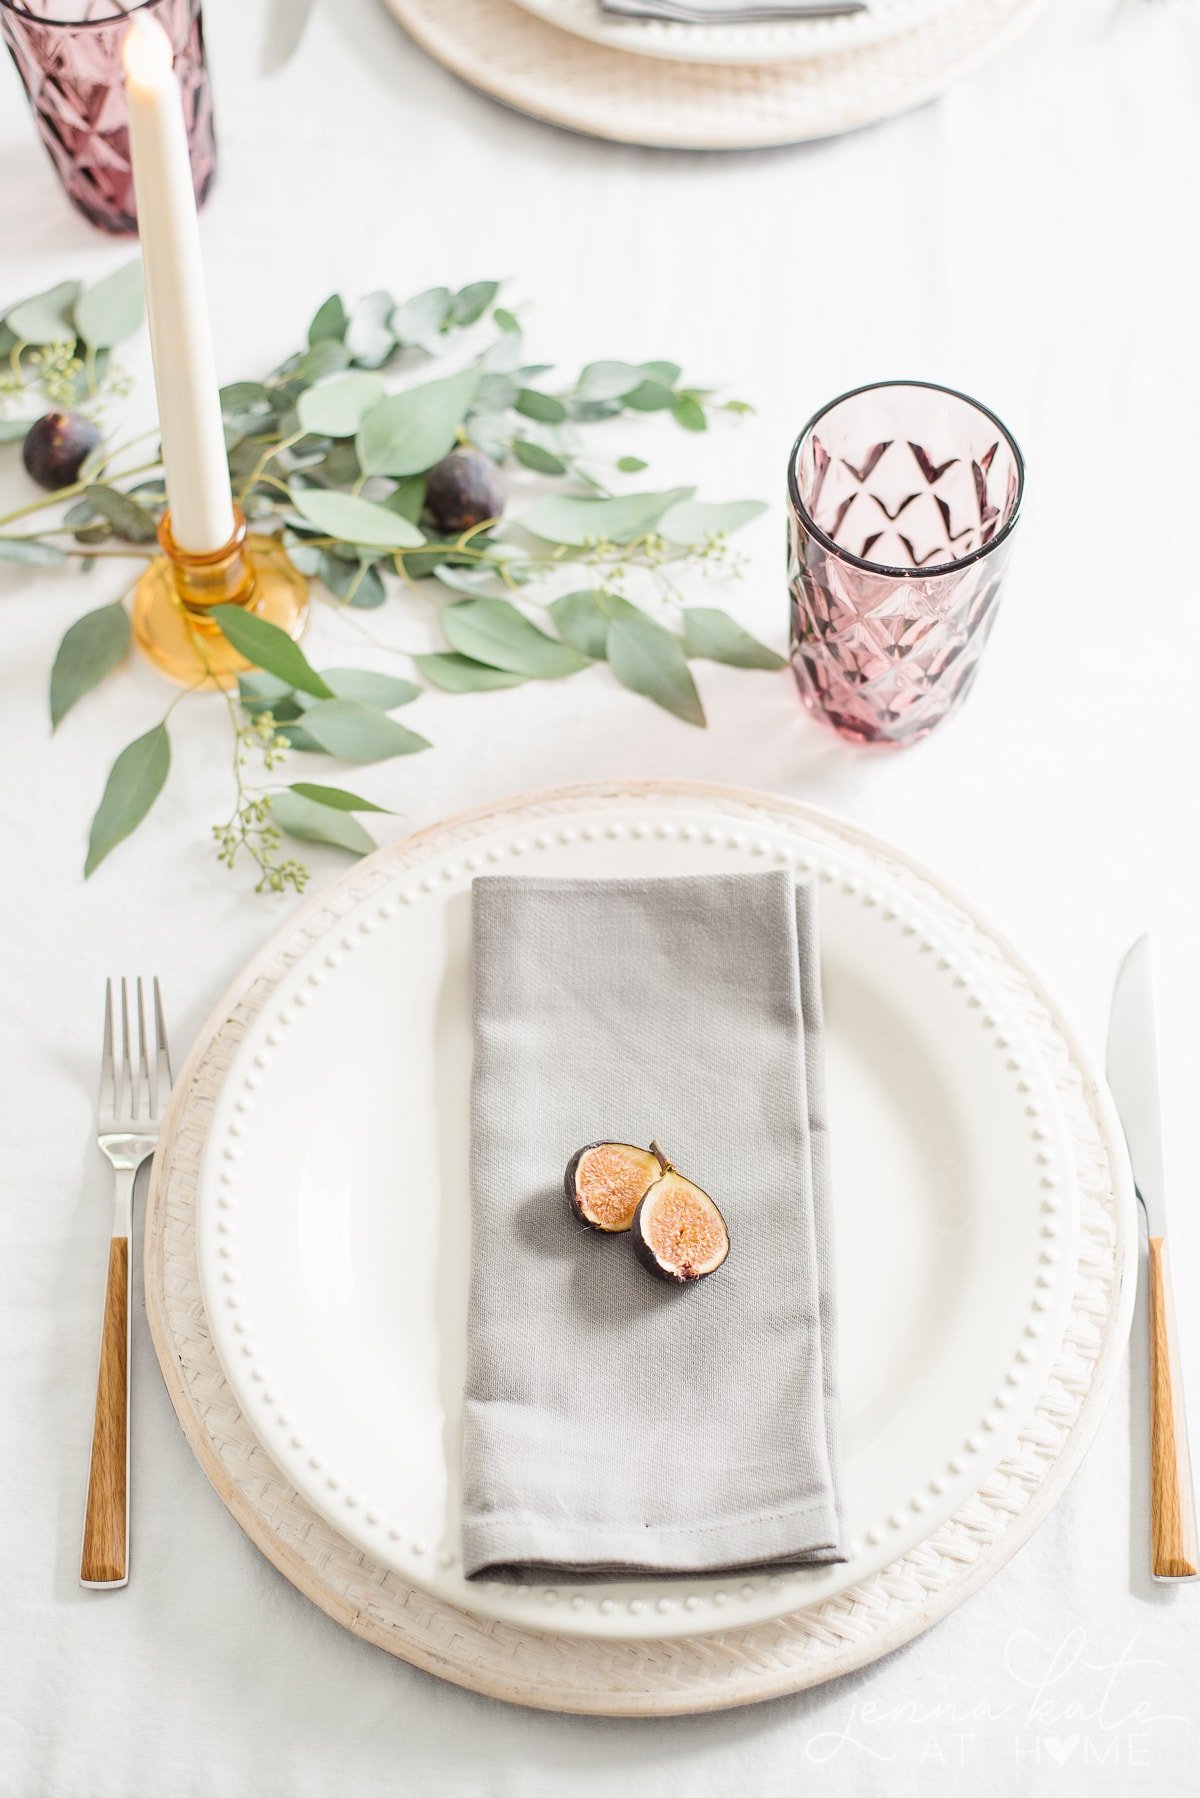 Simple fig place setting